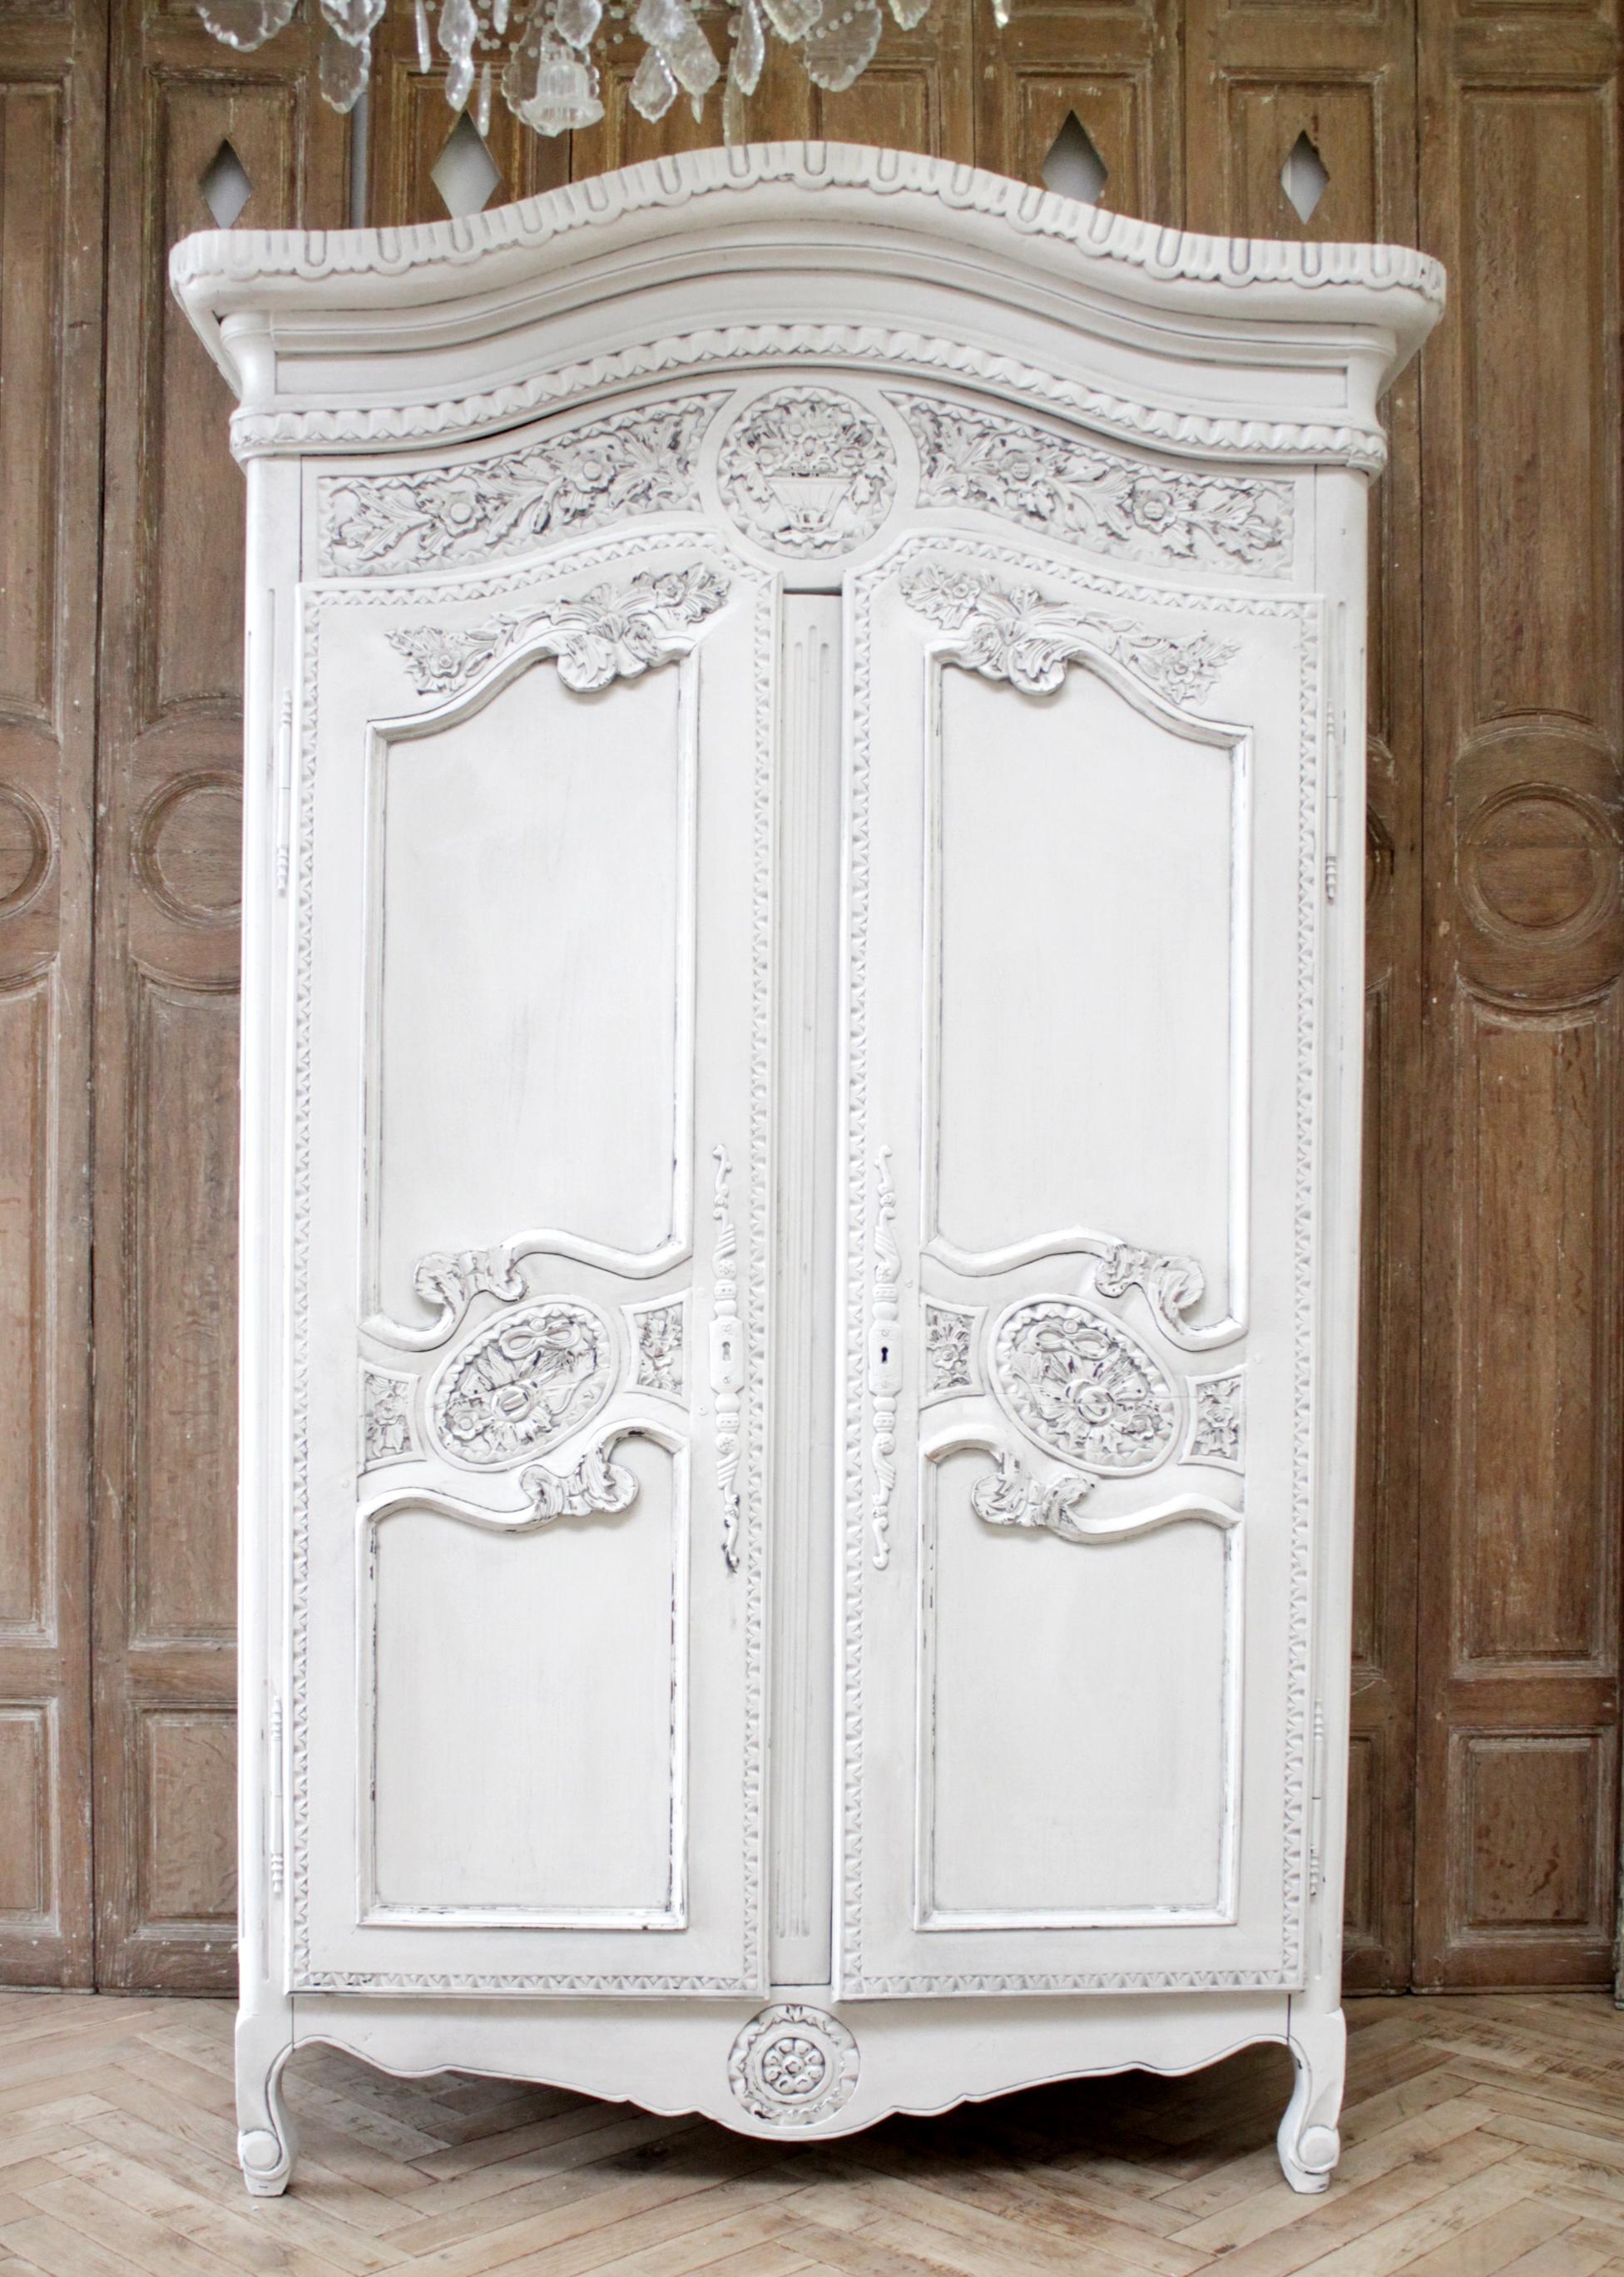 19th century carved and painted French armoire from Provence.
Painted in our oyster white finish, with subtle distressed edges, and antique patina.
Double doors open and close with ease, opening up to 3 shelves. 
Measures: 28